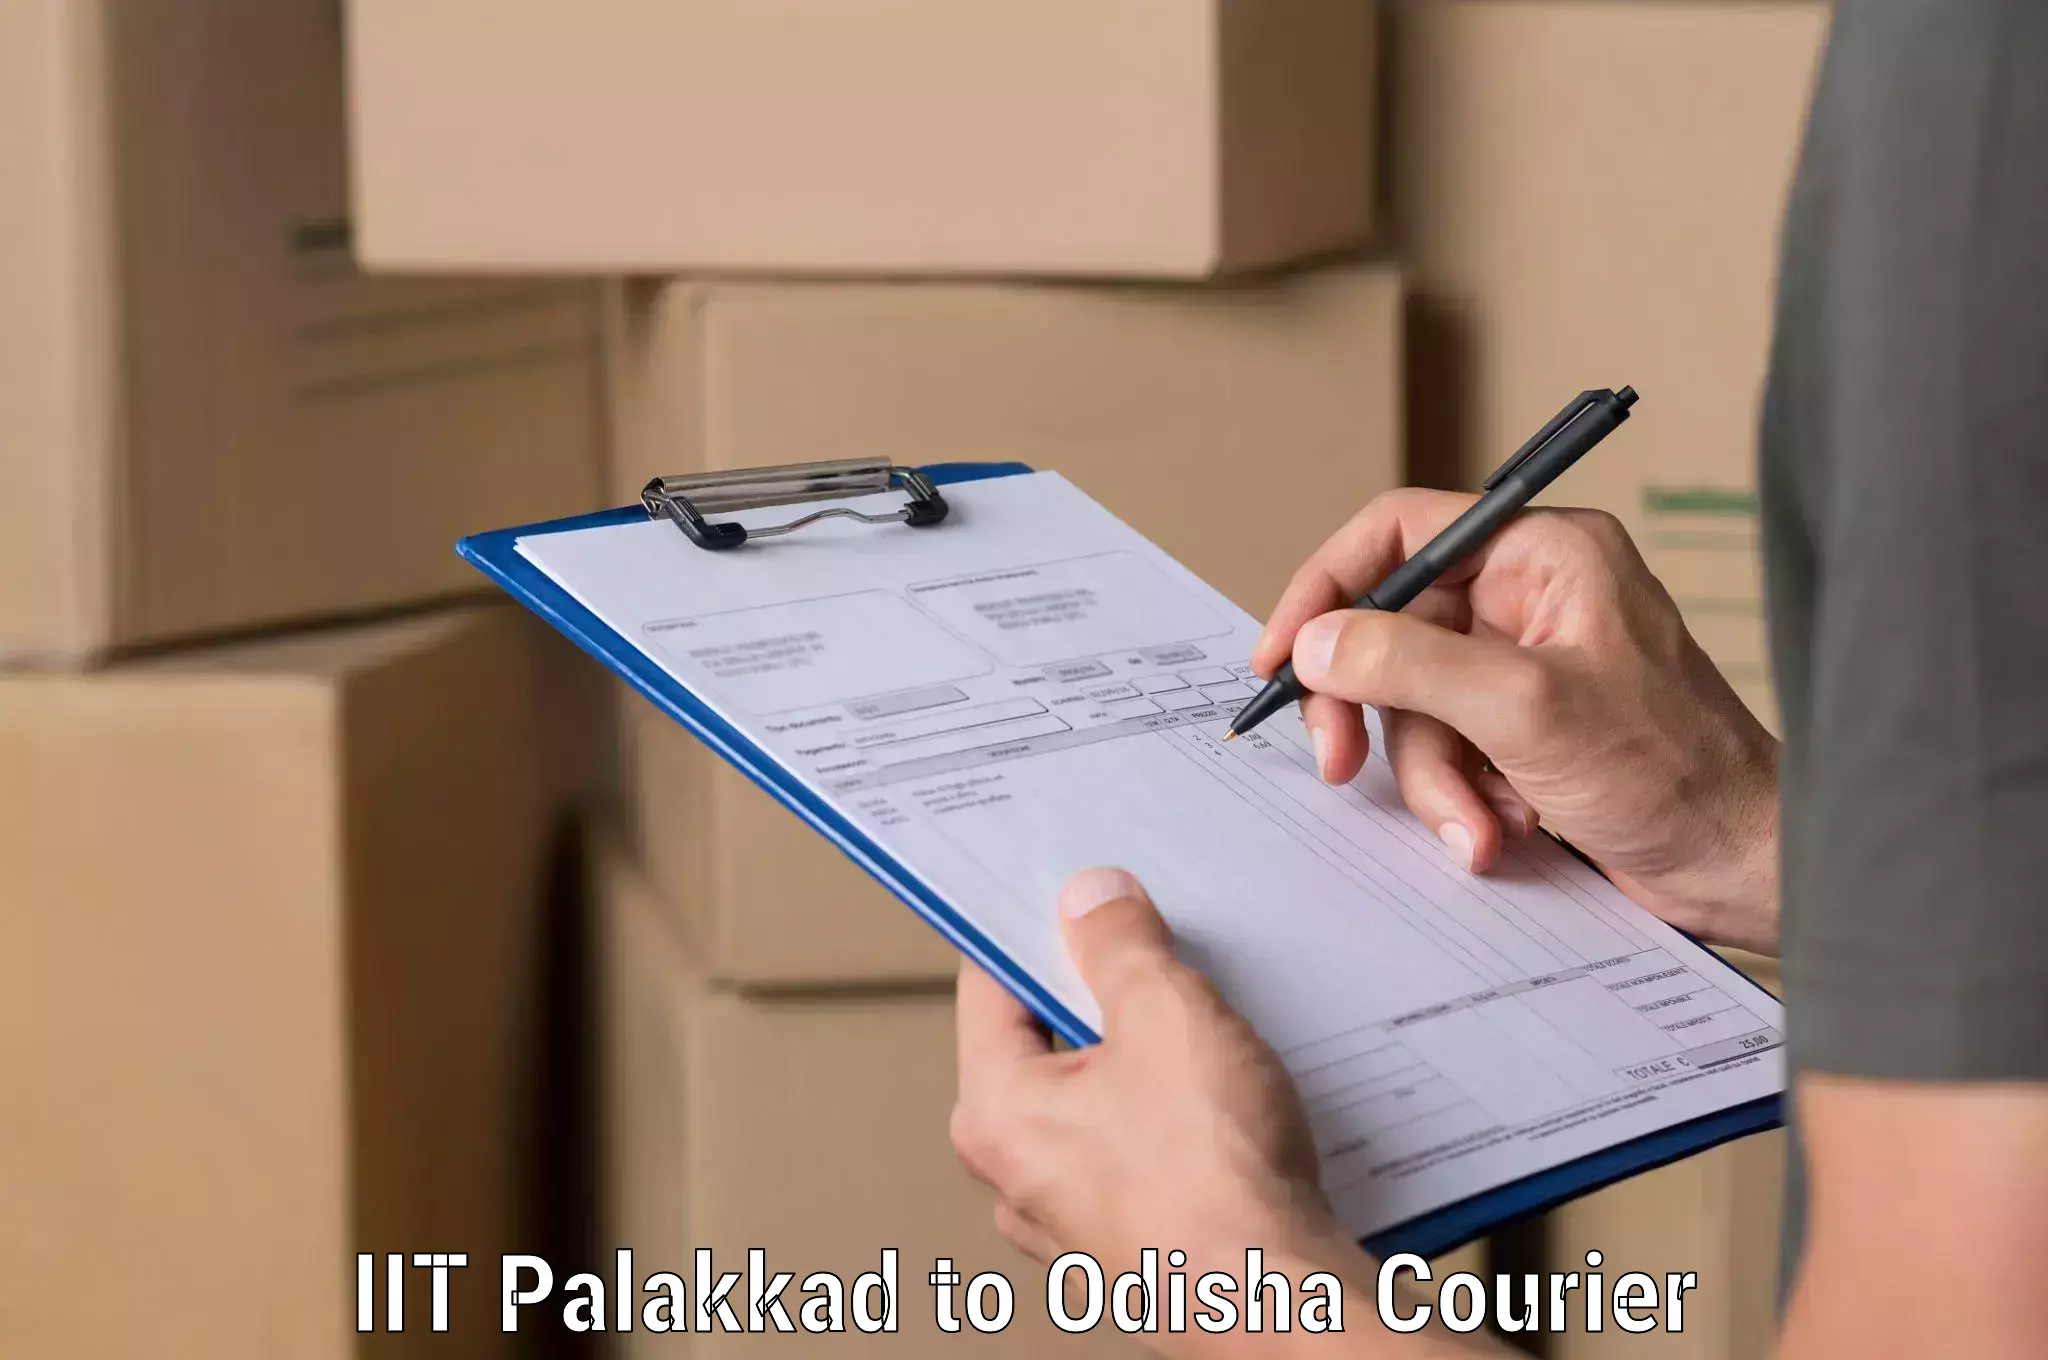 Express delivery solutions IIT Palakkad to Tihidi